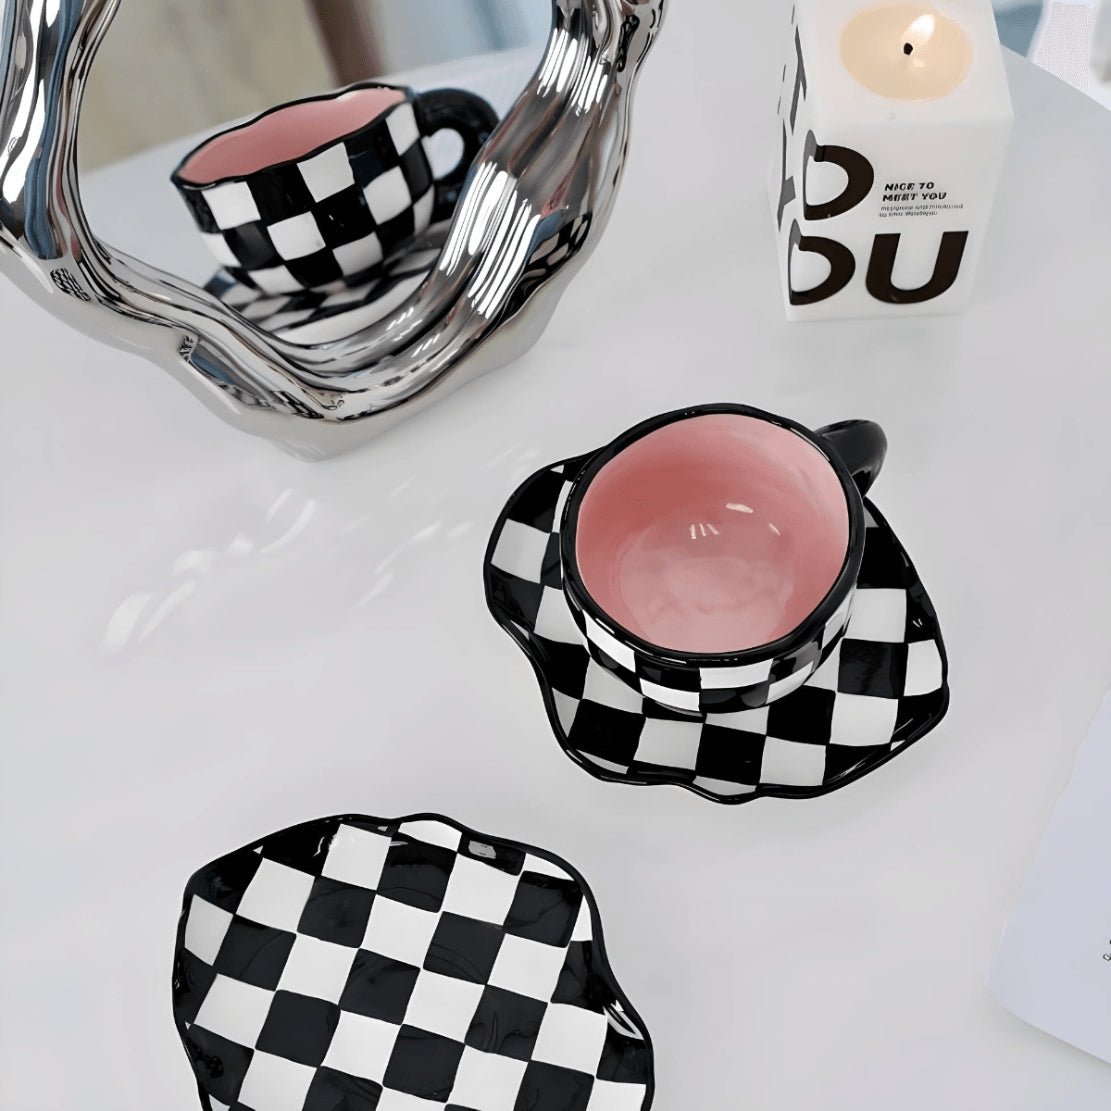 Black white pink checkerboard irregular ceramic mug and saucer on table with mirror and candle